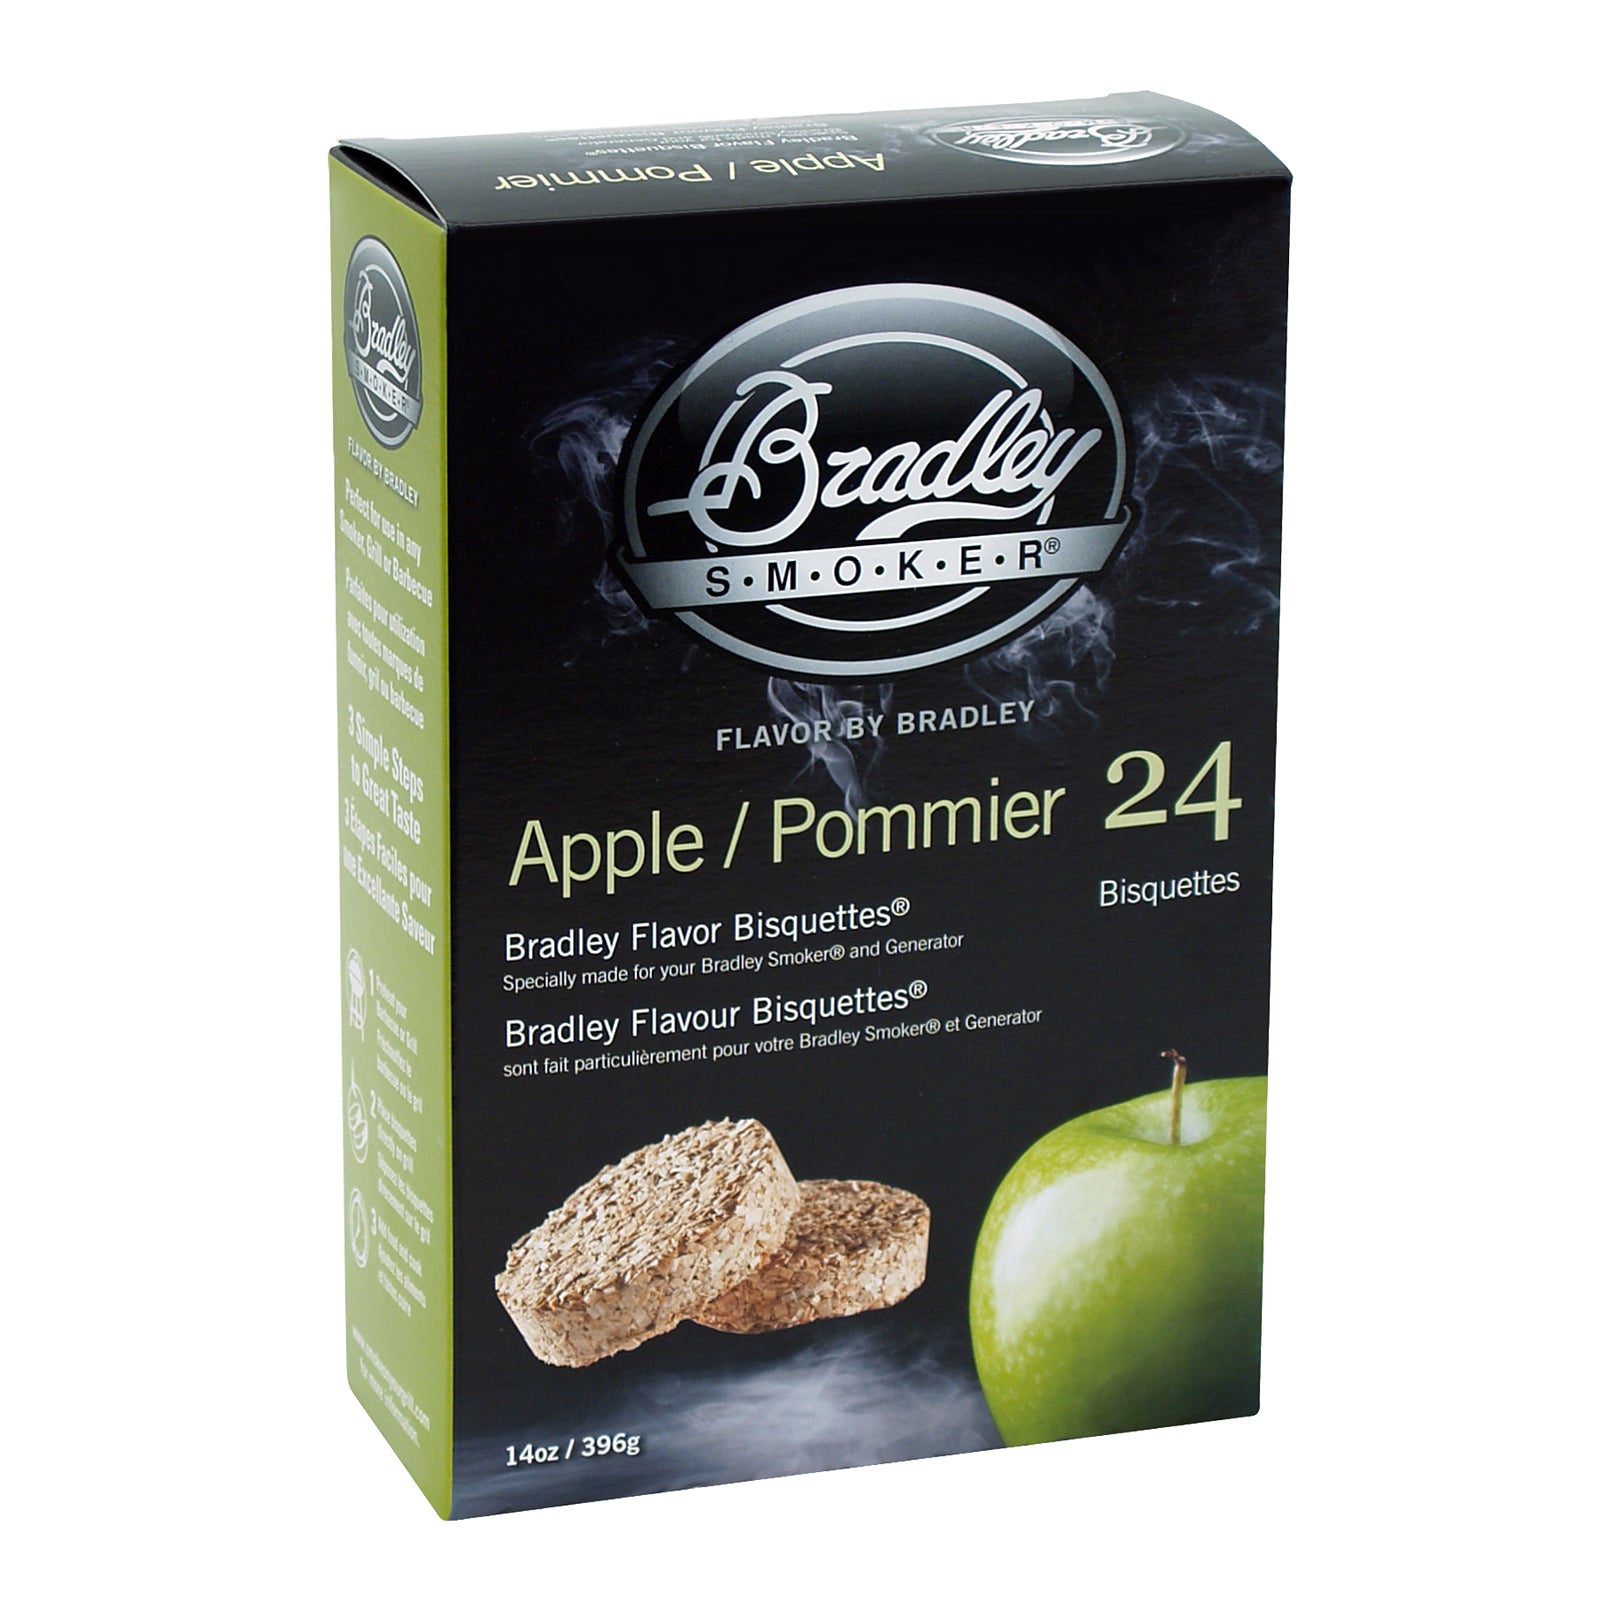 Apple Bisquettes (24 Pack)